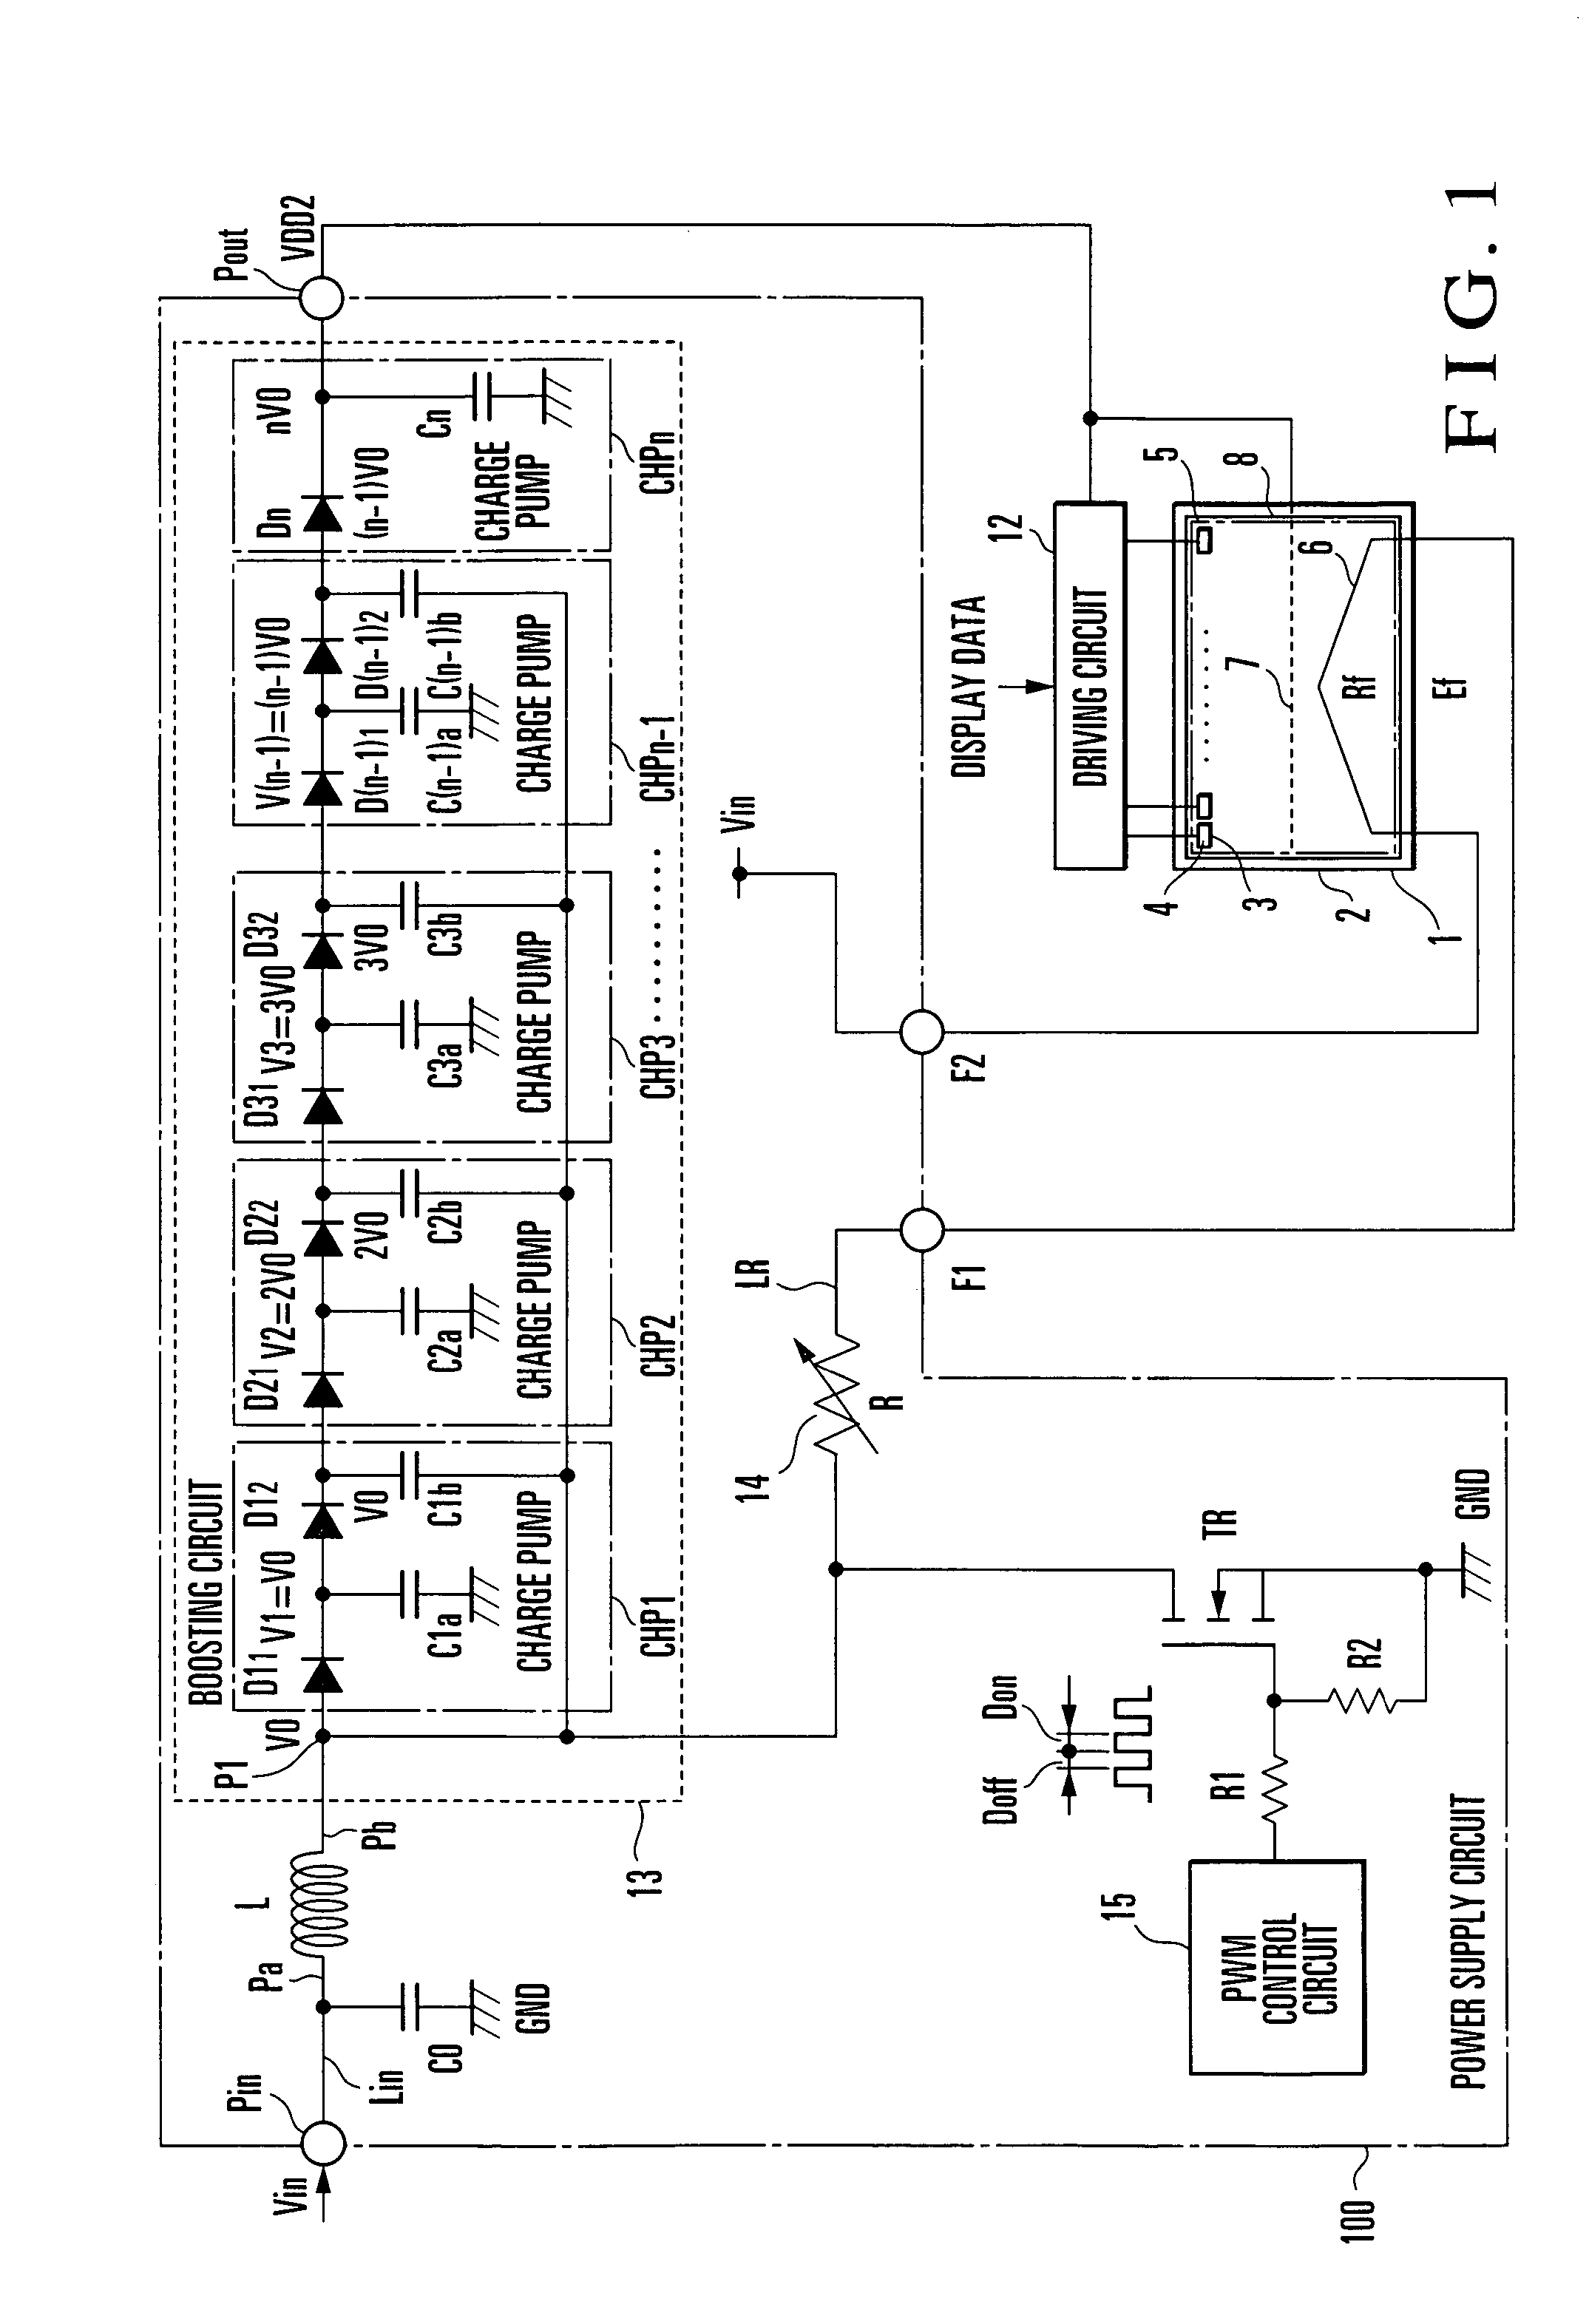 Power supply circuit for vacuum fluorescent display